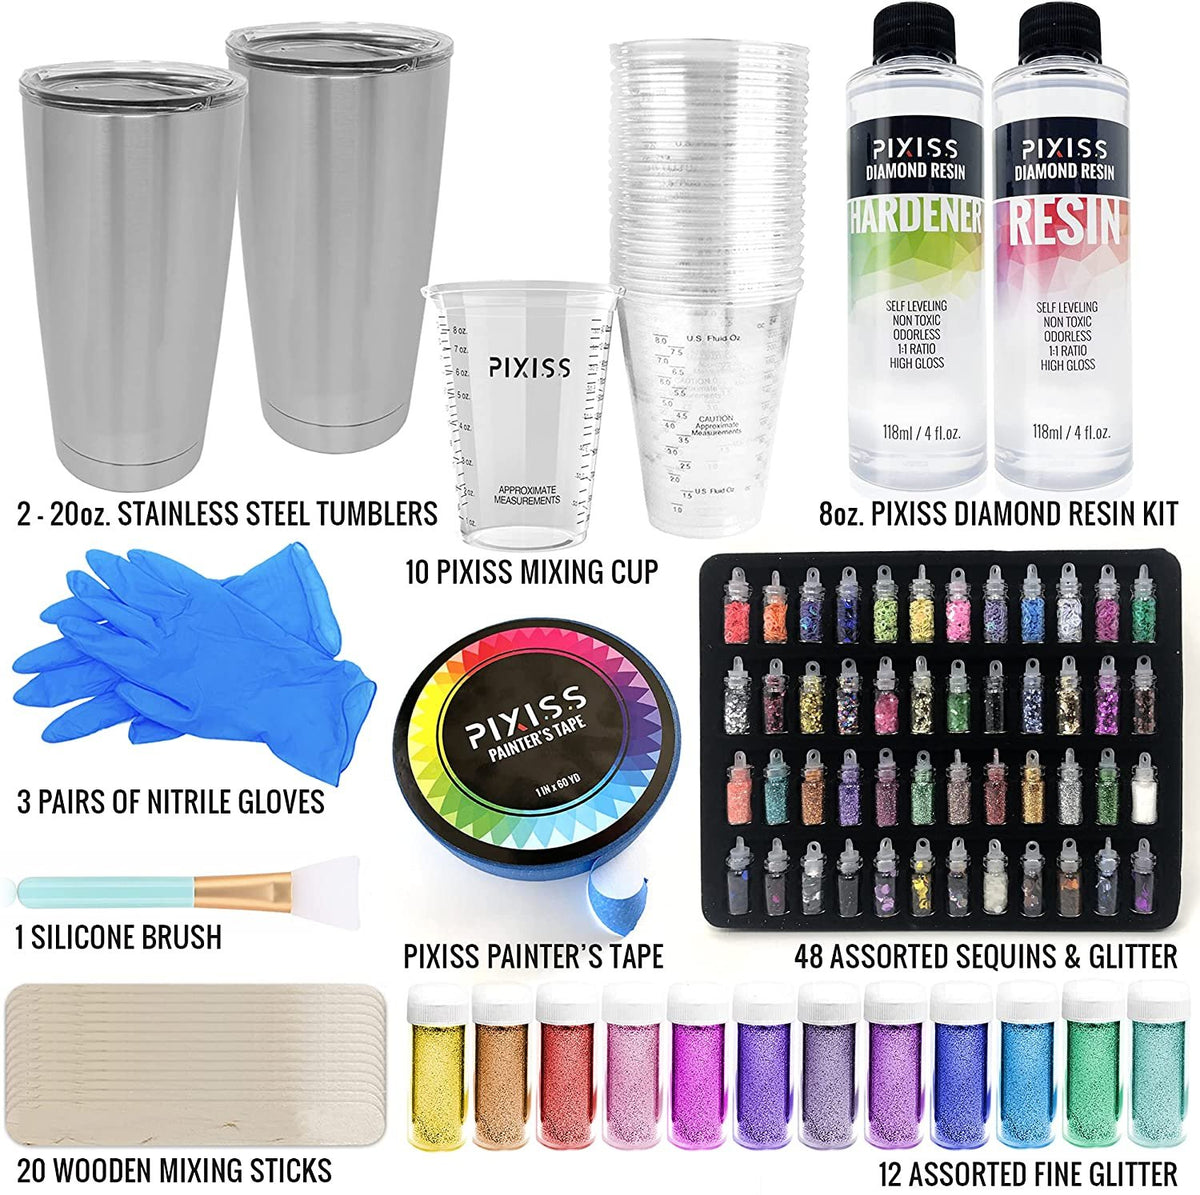 Silicon Epoxy Brushes Set for Making Epoxy Glitter Tumblers, Reusable  Flexible Epoxy Application Sticks for Spreading an Even Coat of Epoxy Resin  on